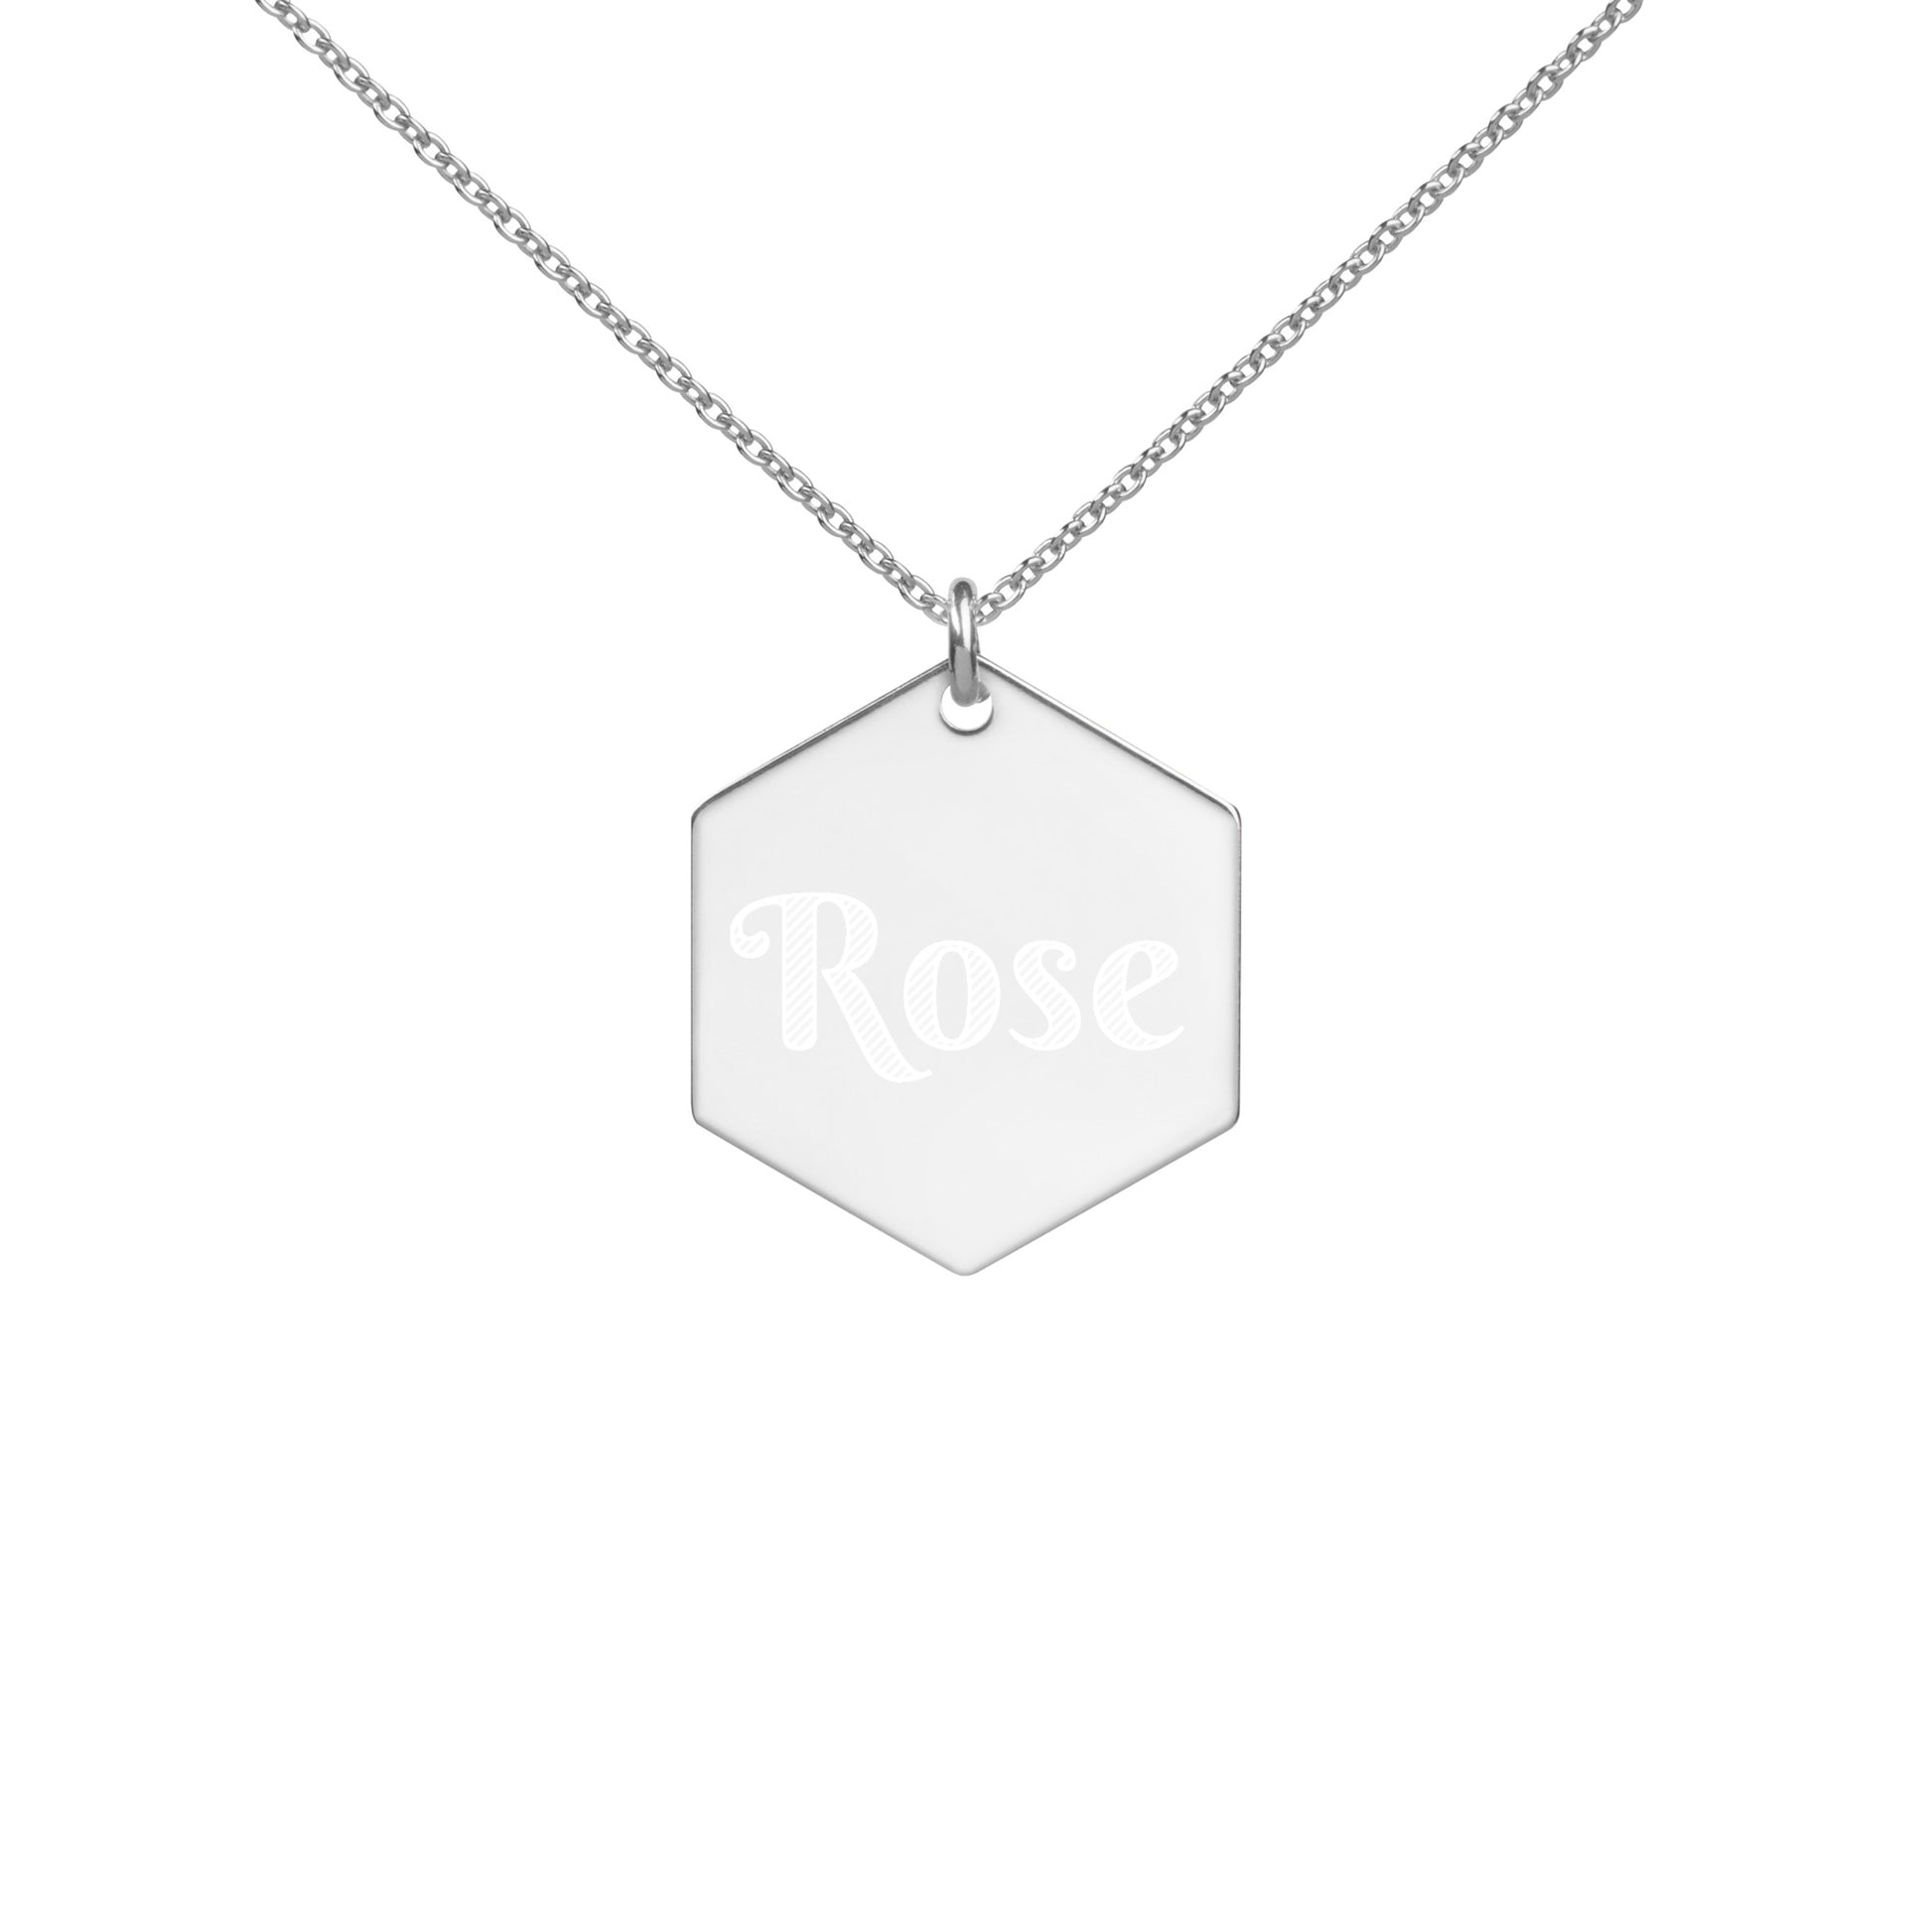 White rhodium coated chain necklace